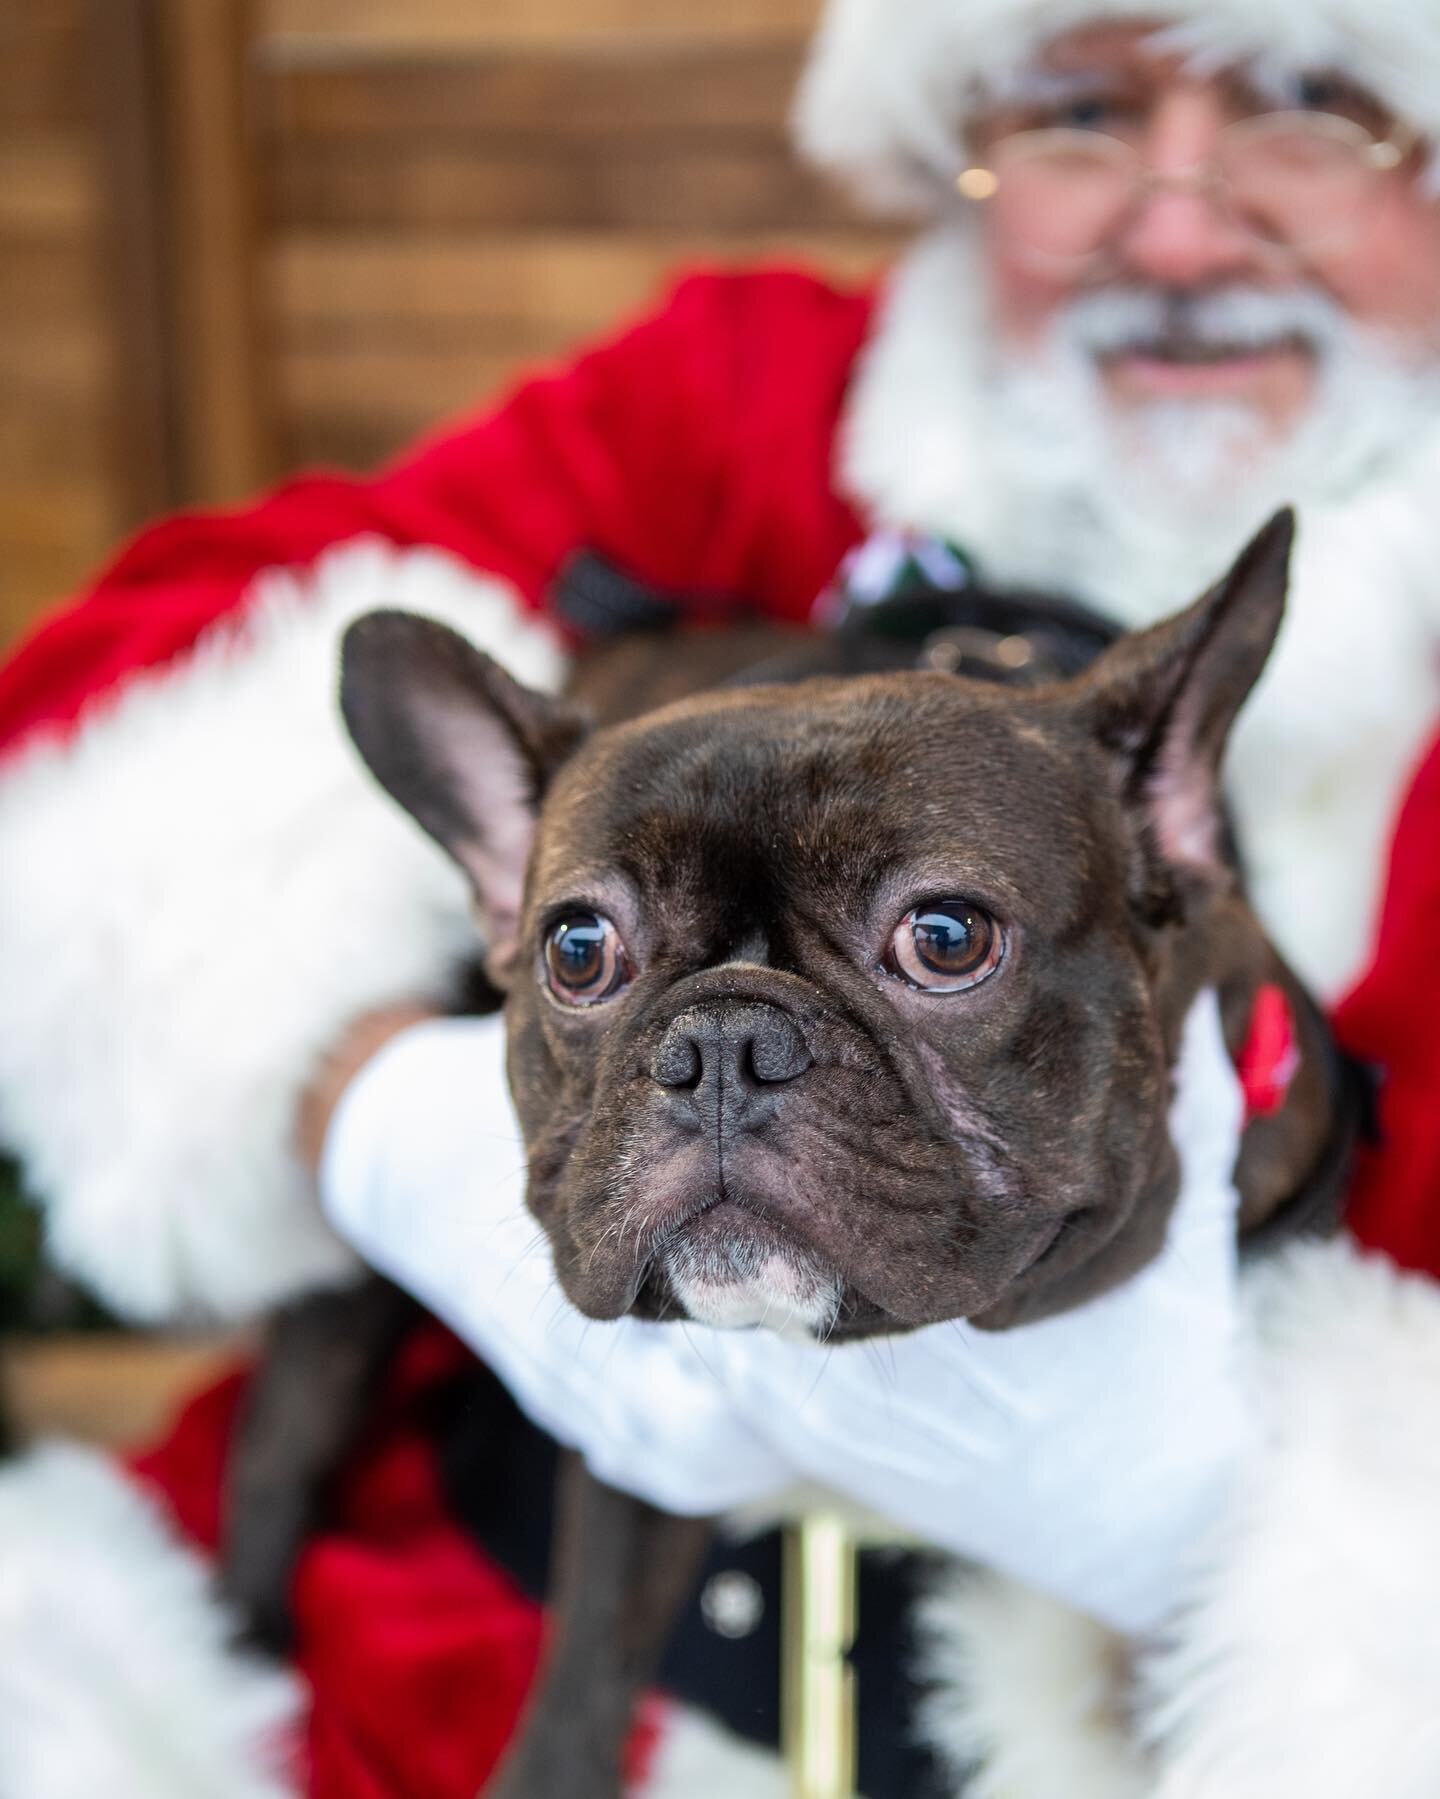 Santa&rsquo;s little helper!

Stop by @dogtopiawarwick today from 12-4 for a Santa Paws pet portrait with the amazing @meaghansusi 🎄

📸 @brittanysemco 
Hosted by @animaltalk19 
Co-hosted by @werehereforthedogs 

#frenchbulldog #frenchie #santa #chr